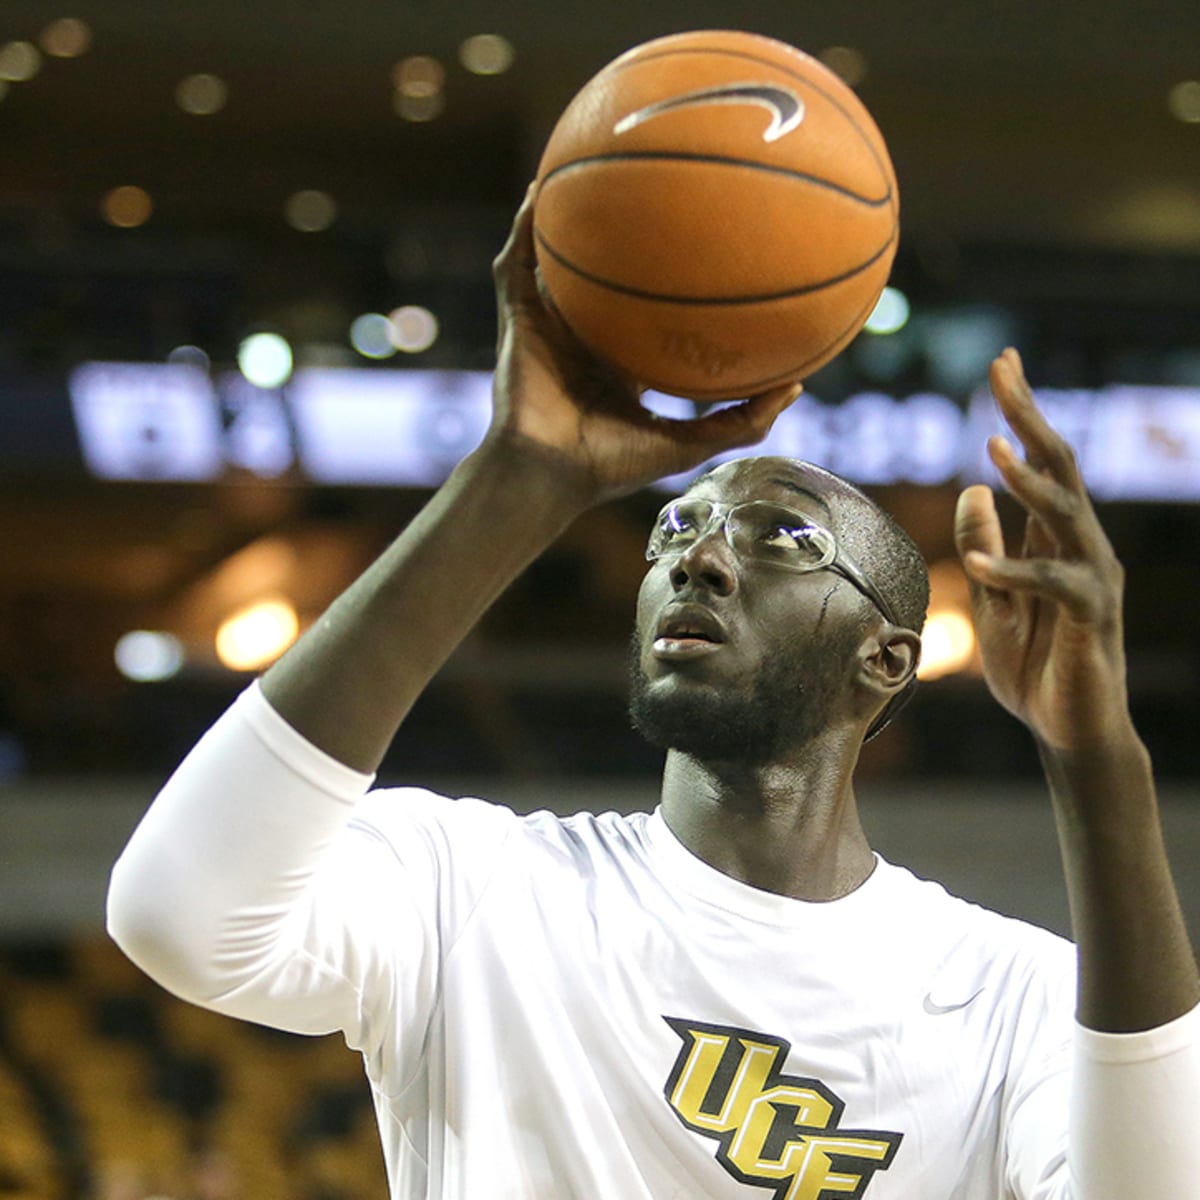 Tacko Fall wears size 22 shoe, joins rare NBA group featuring Shaq - Sports  Illustrated